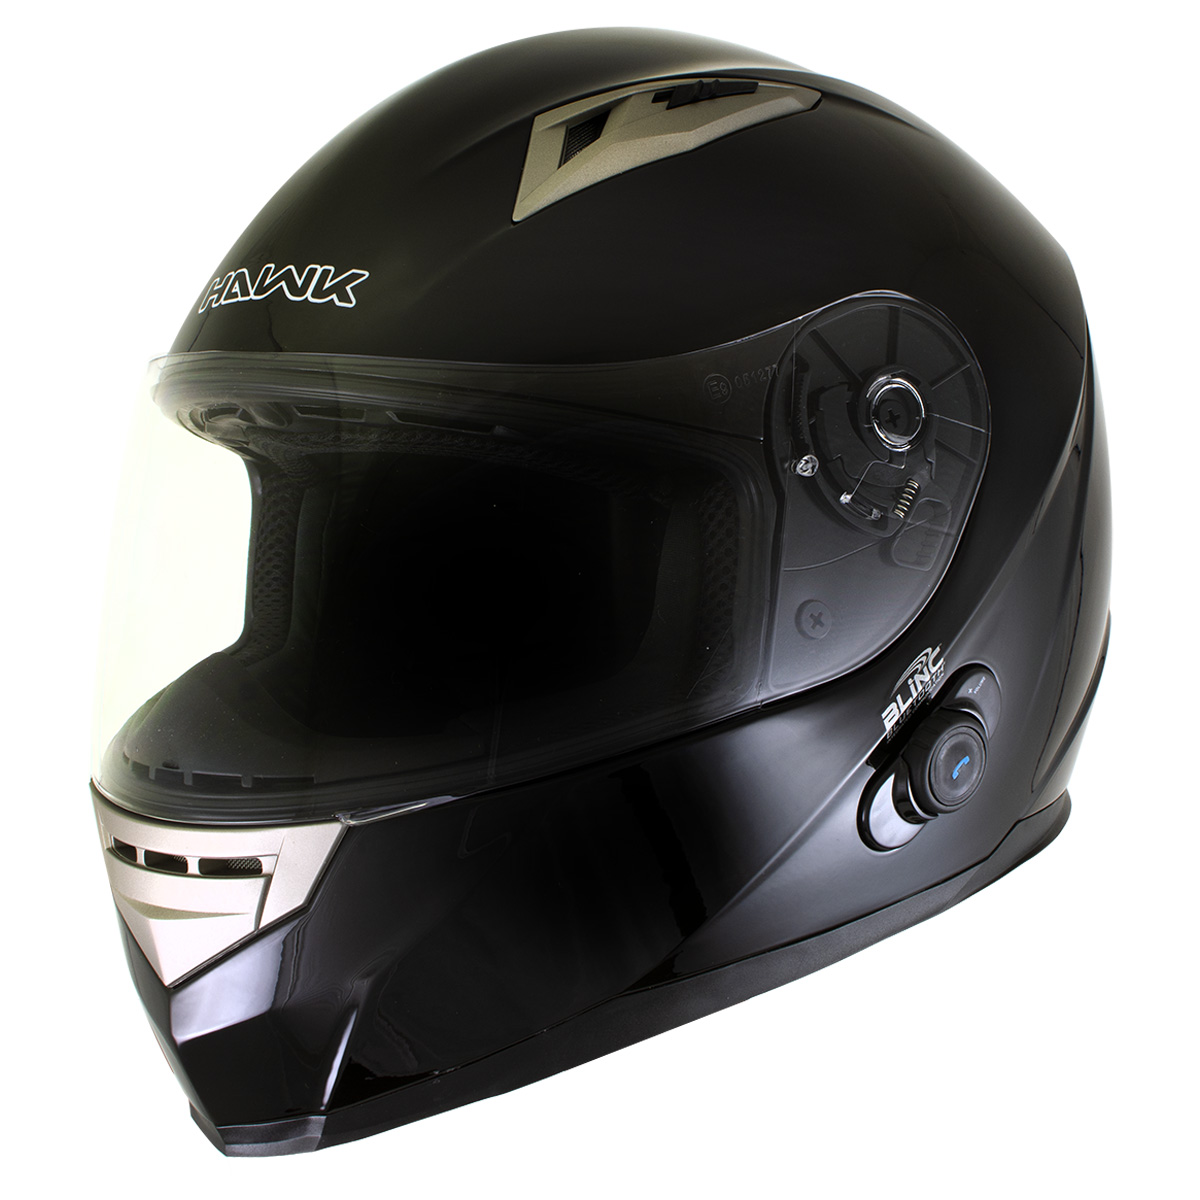 Best Bluetooth Motorcycle Helmets (Review & Buying Guide) in 2020 - The